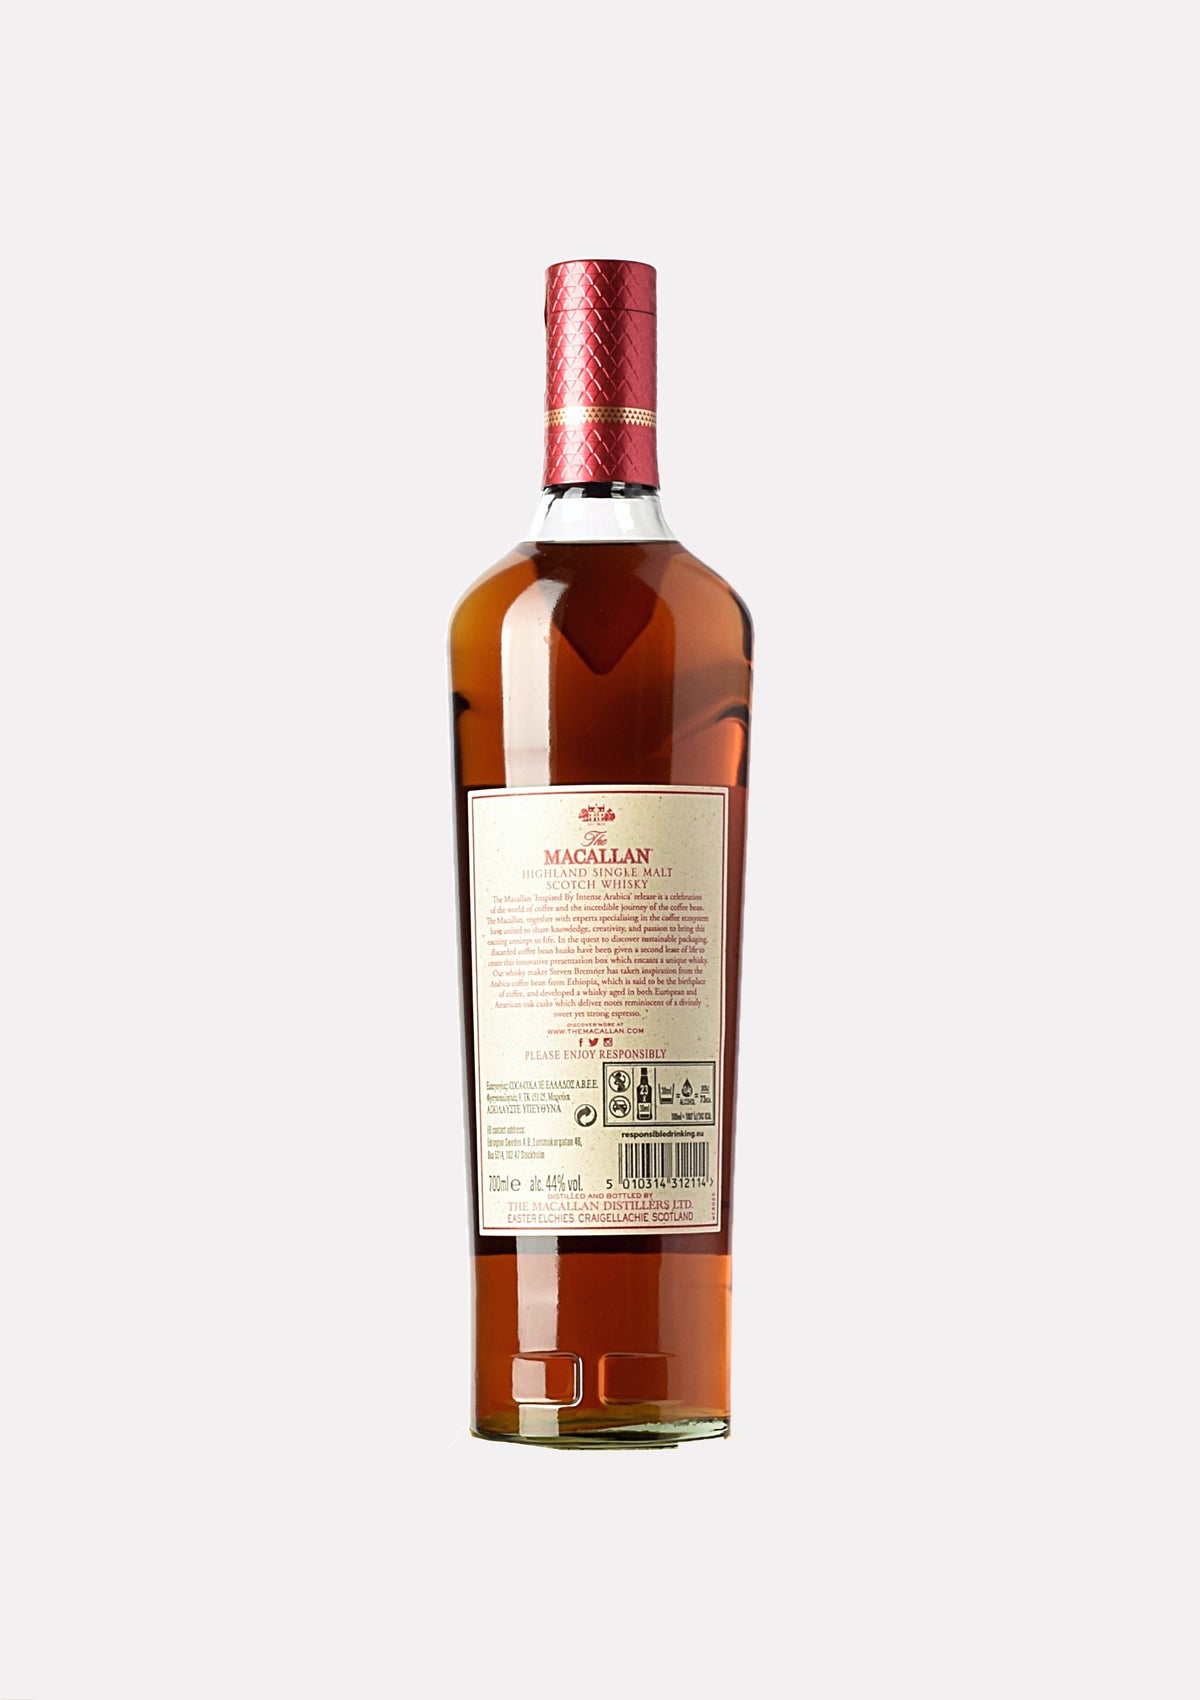 Macallan The Harmony Collection Inspired by Intense Arabica 2022